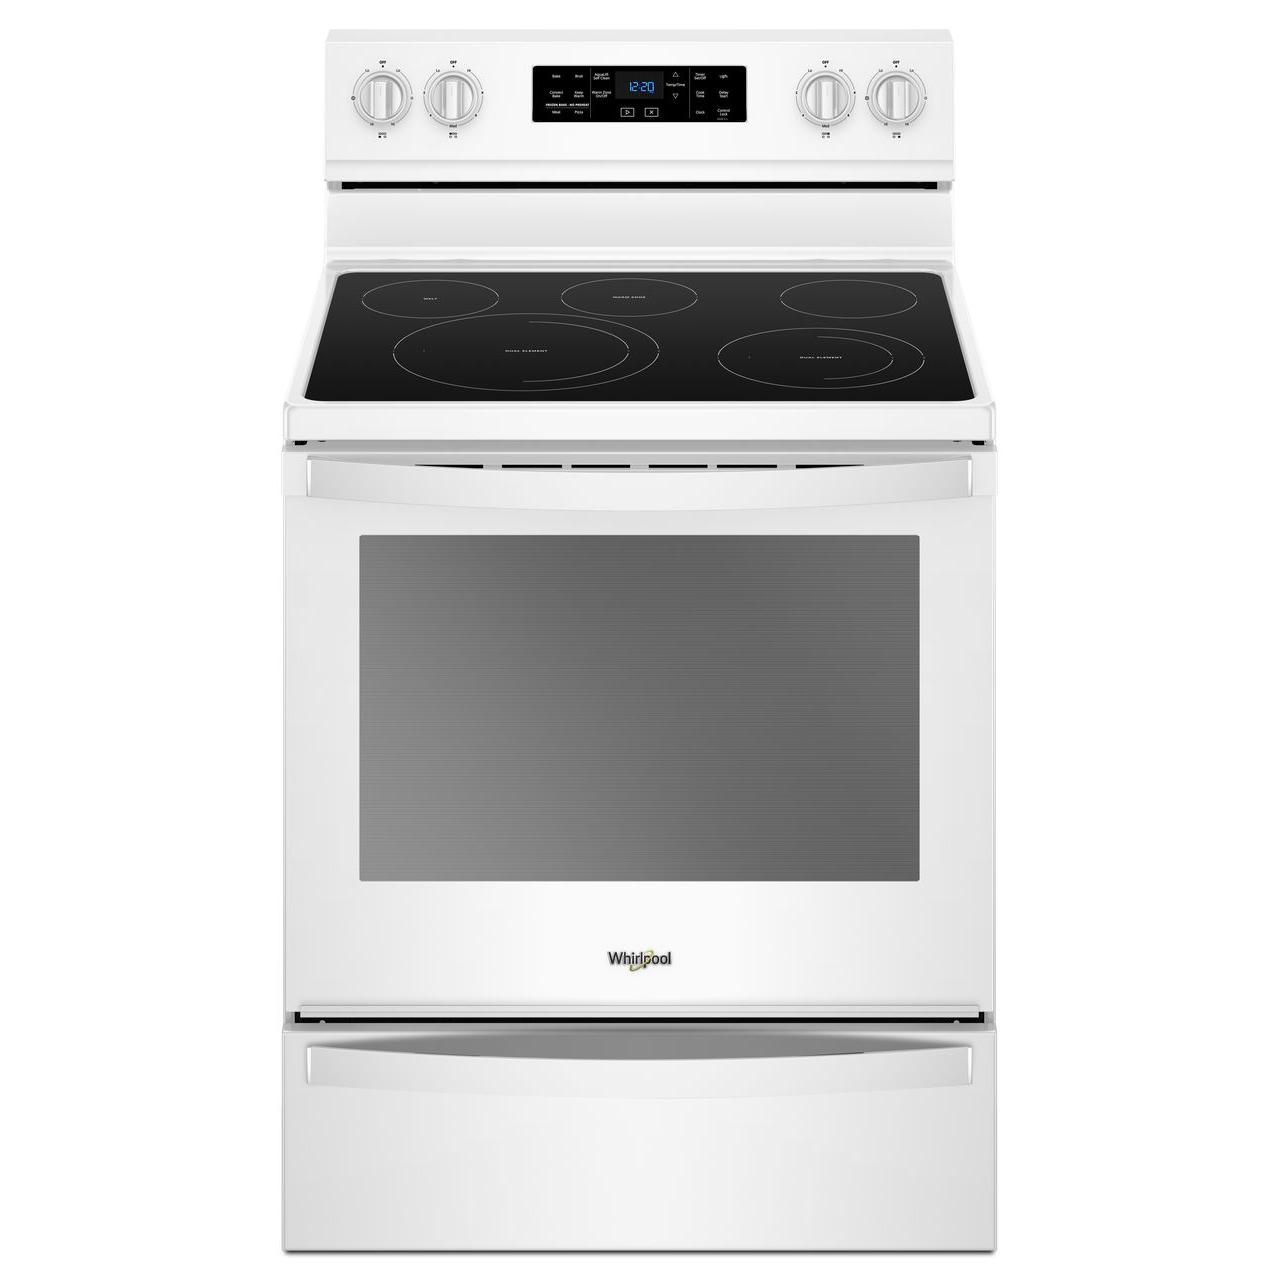 Whirlpool 30-inch Freestanding Electric Range with Frozen Bake? Technology WFE775H0HW